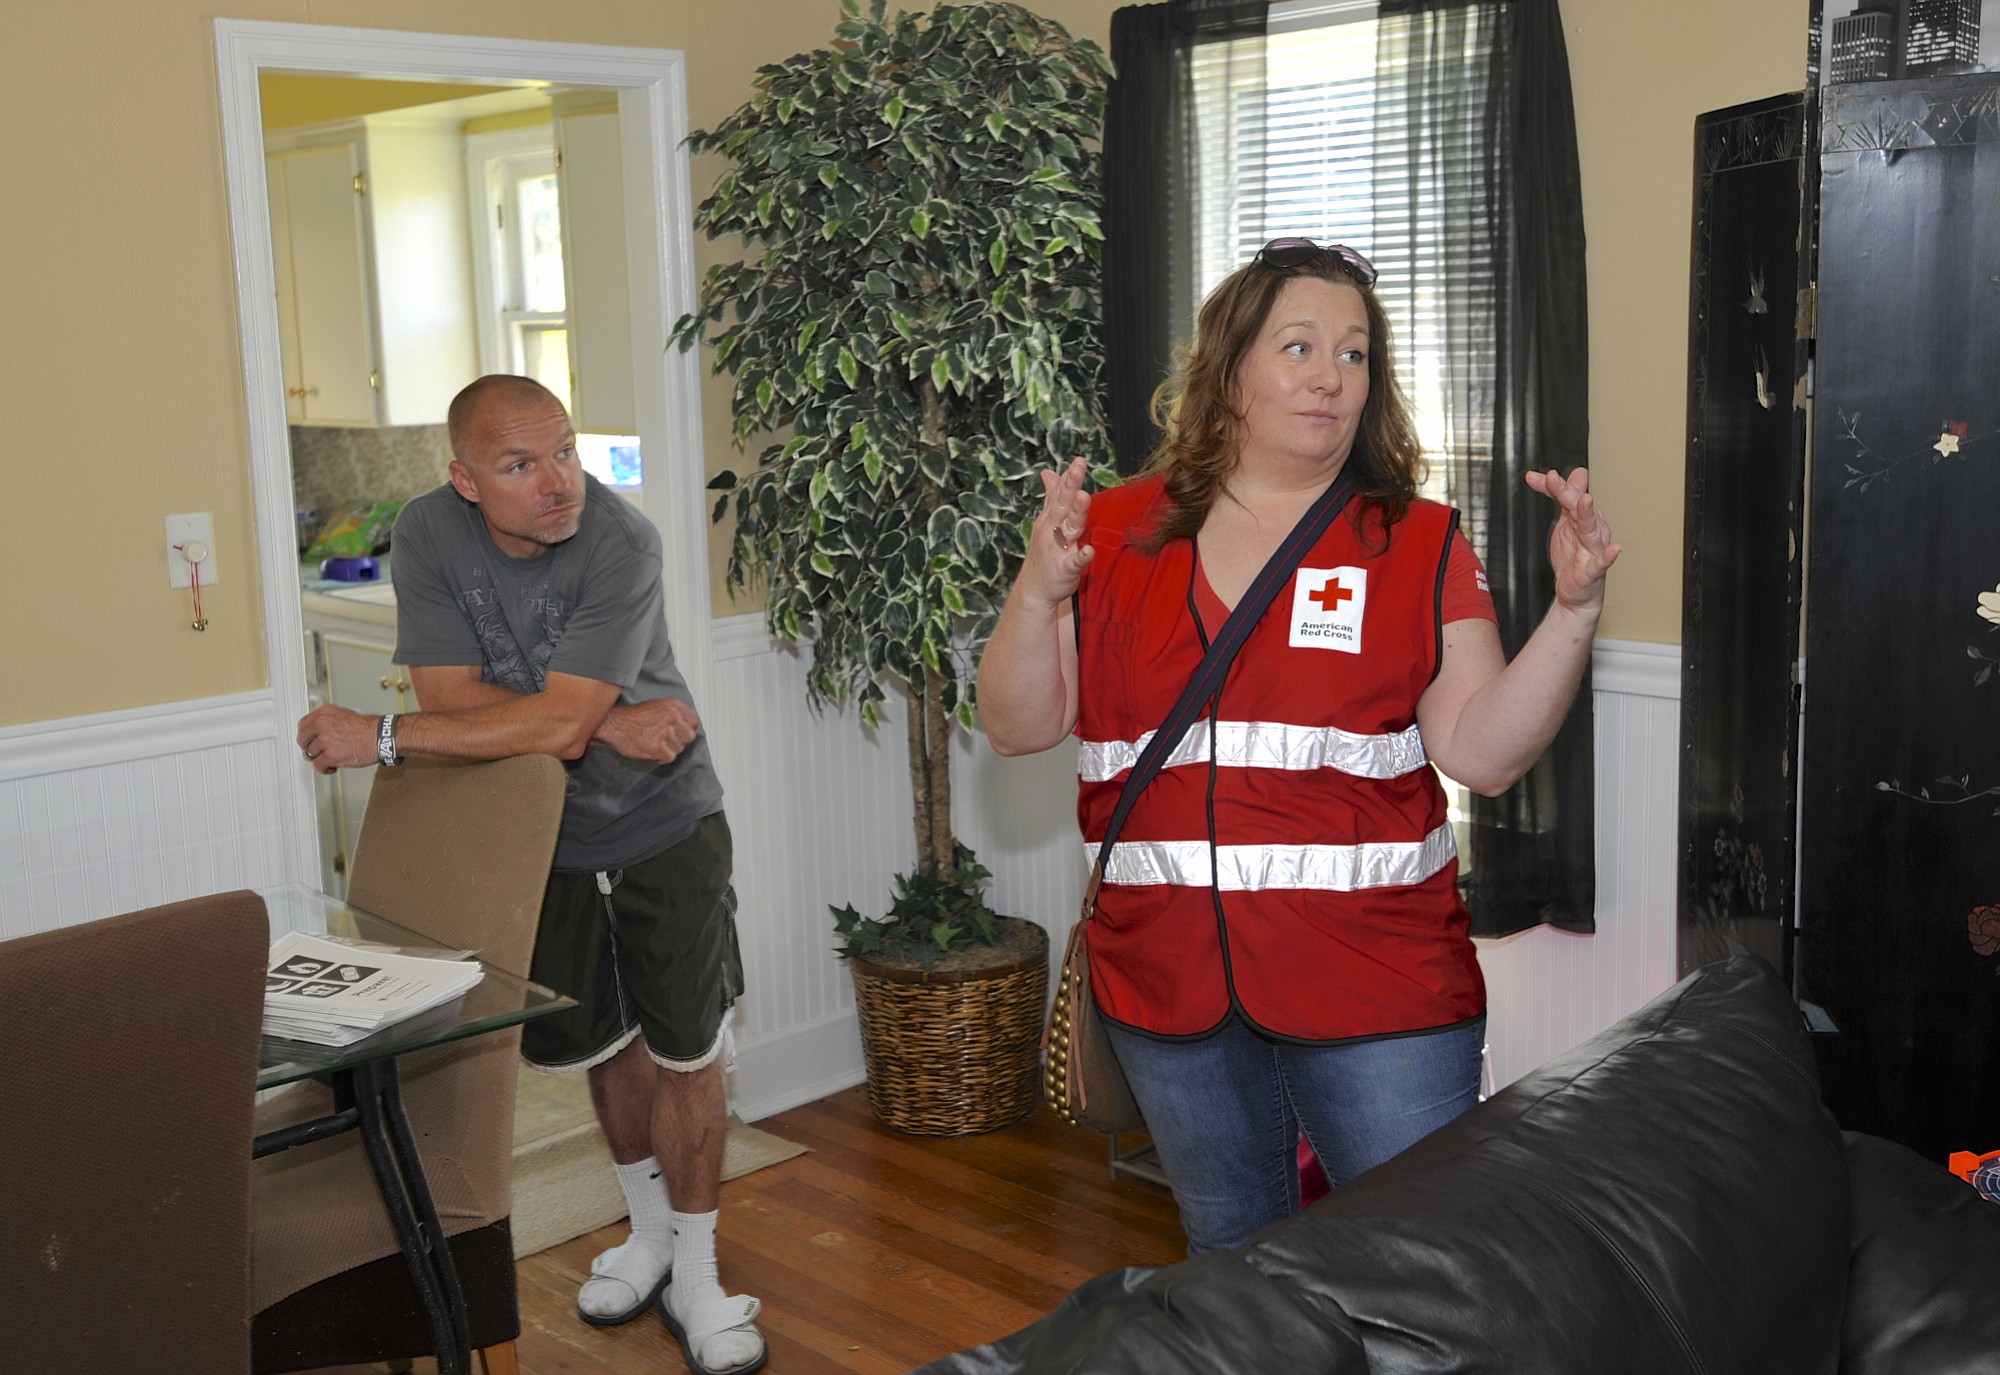 Red Cross volunteer Jessica Chapman, right, talks with residents including Kevin Brown as a group install smoke alarms in Vancouver.